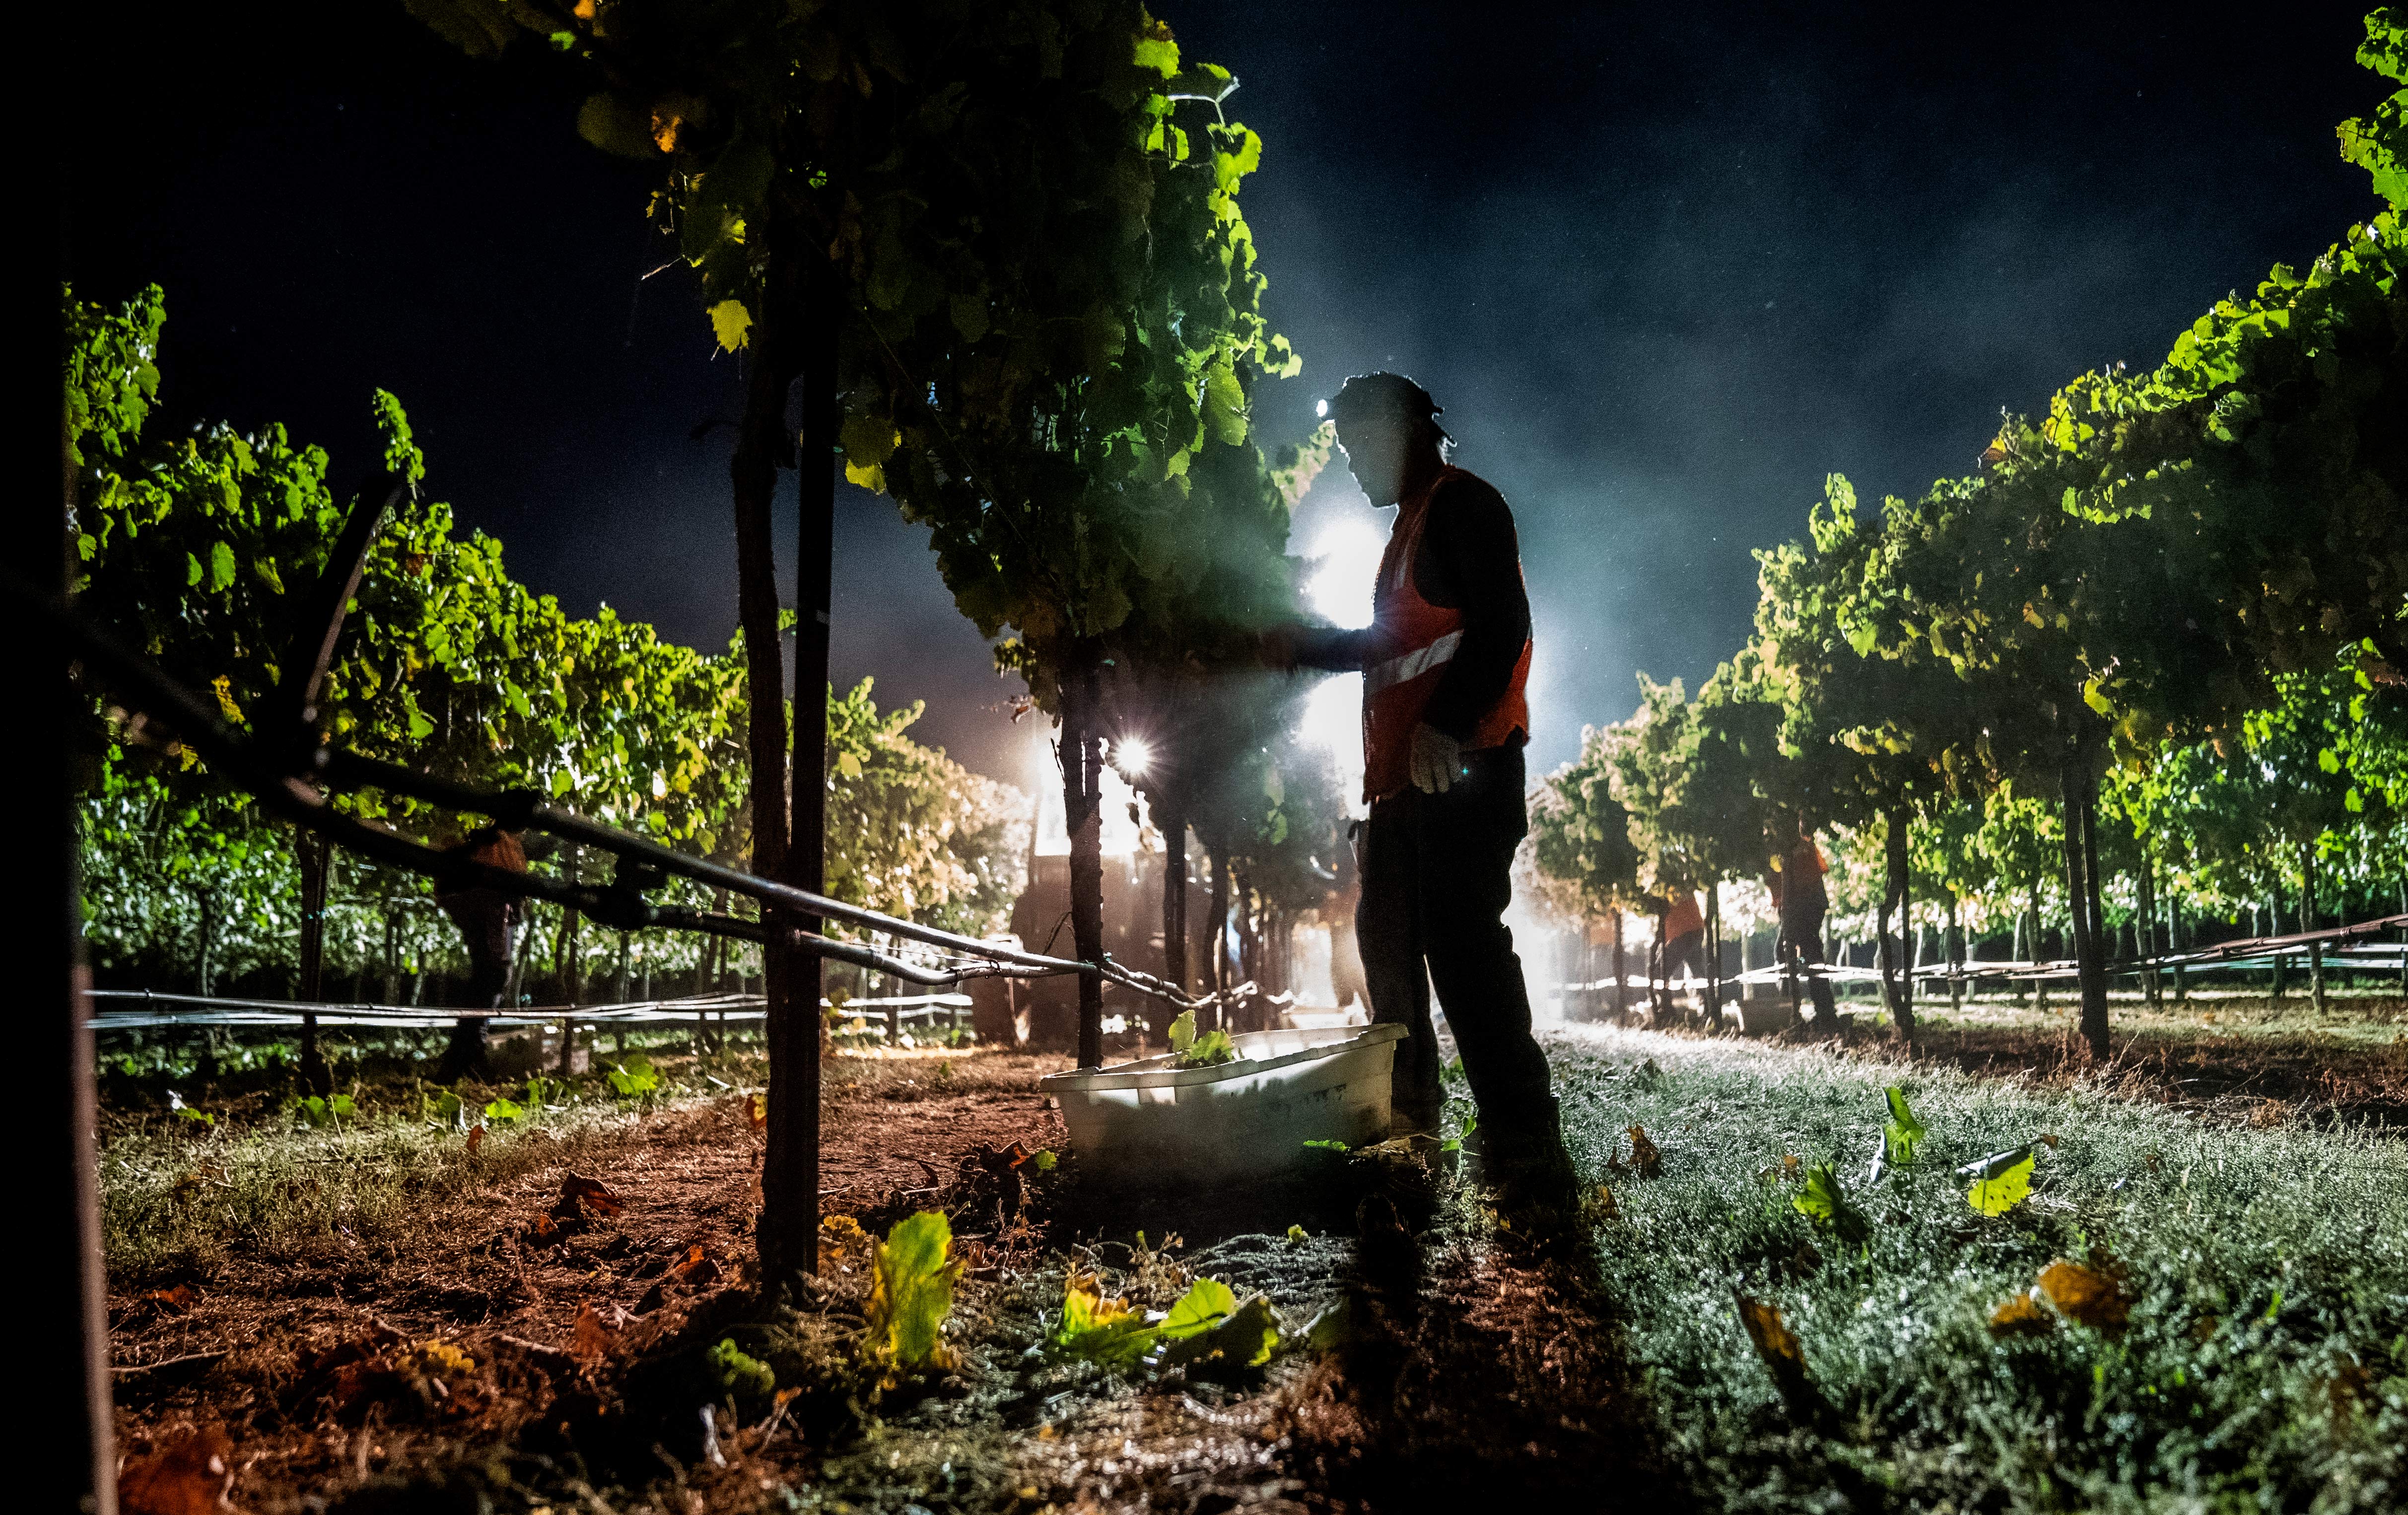 Early morning grape harvest at the UC Davis Robert Mondavi Institute for Wine and Food Science. (Hector Amezcua/UC Davis)